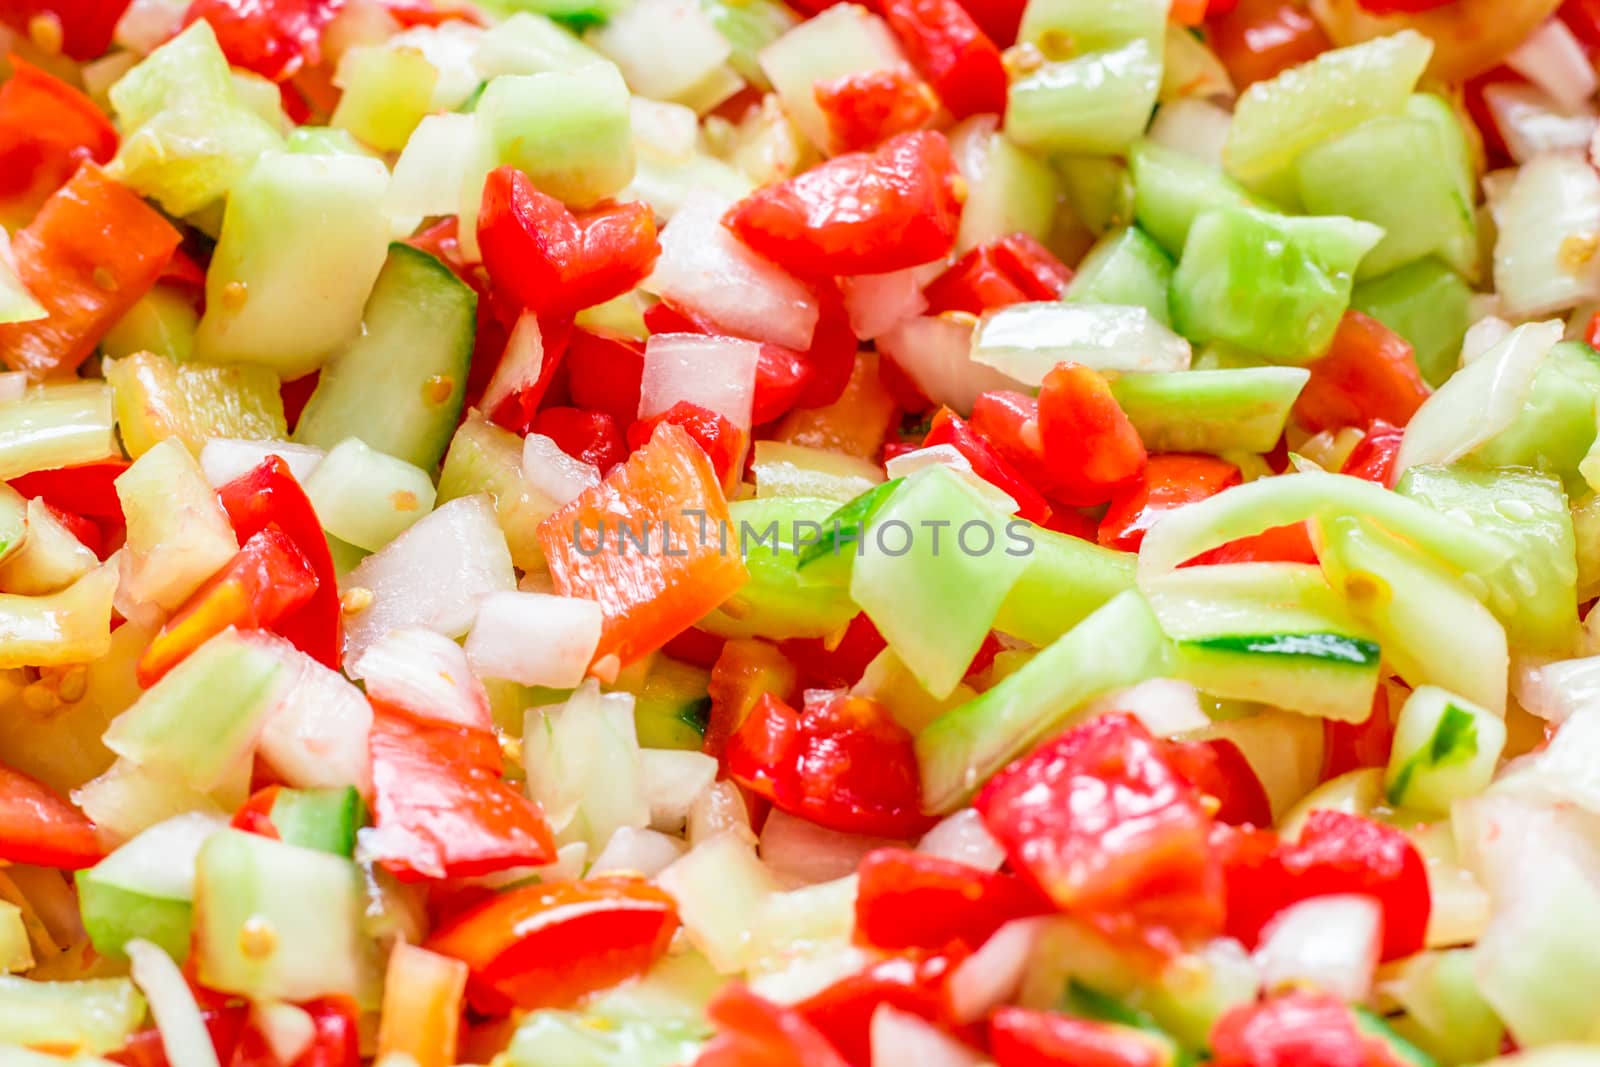 Vegetable salad mix of fresh sliced tomatoes, onions, peppers and cucumbers